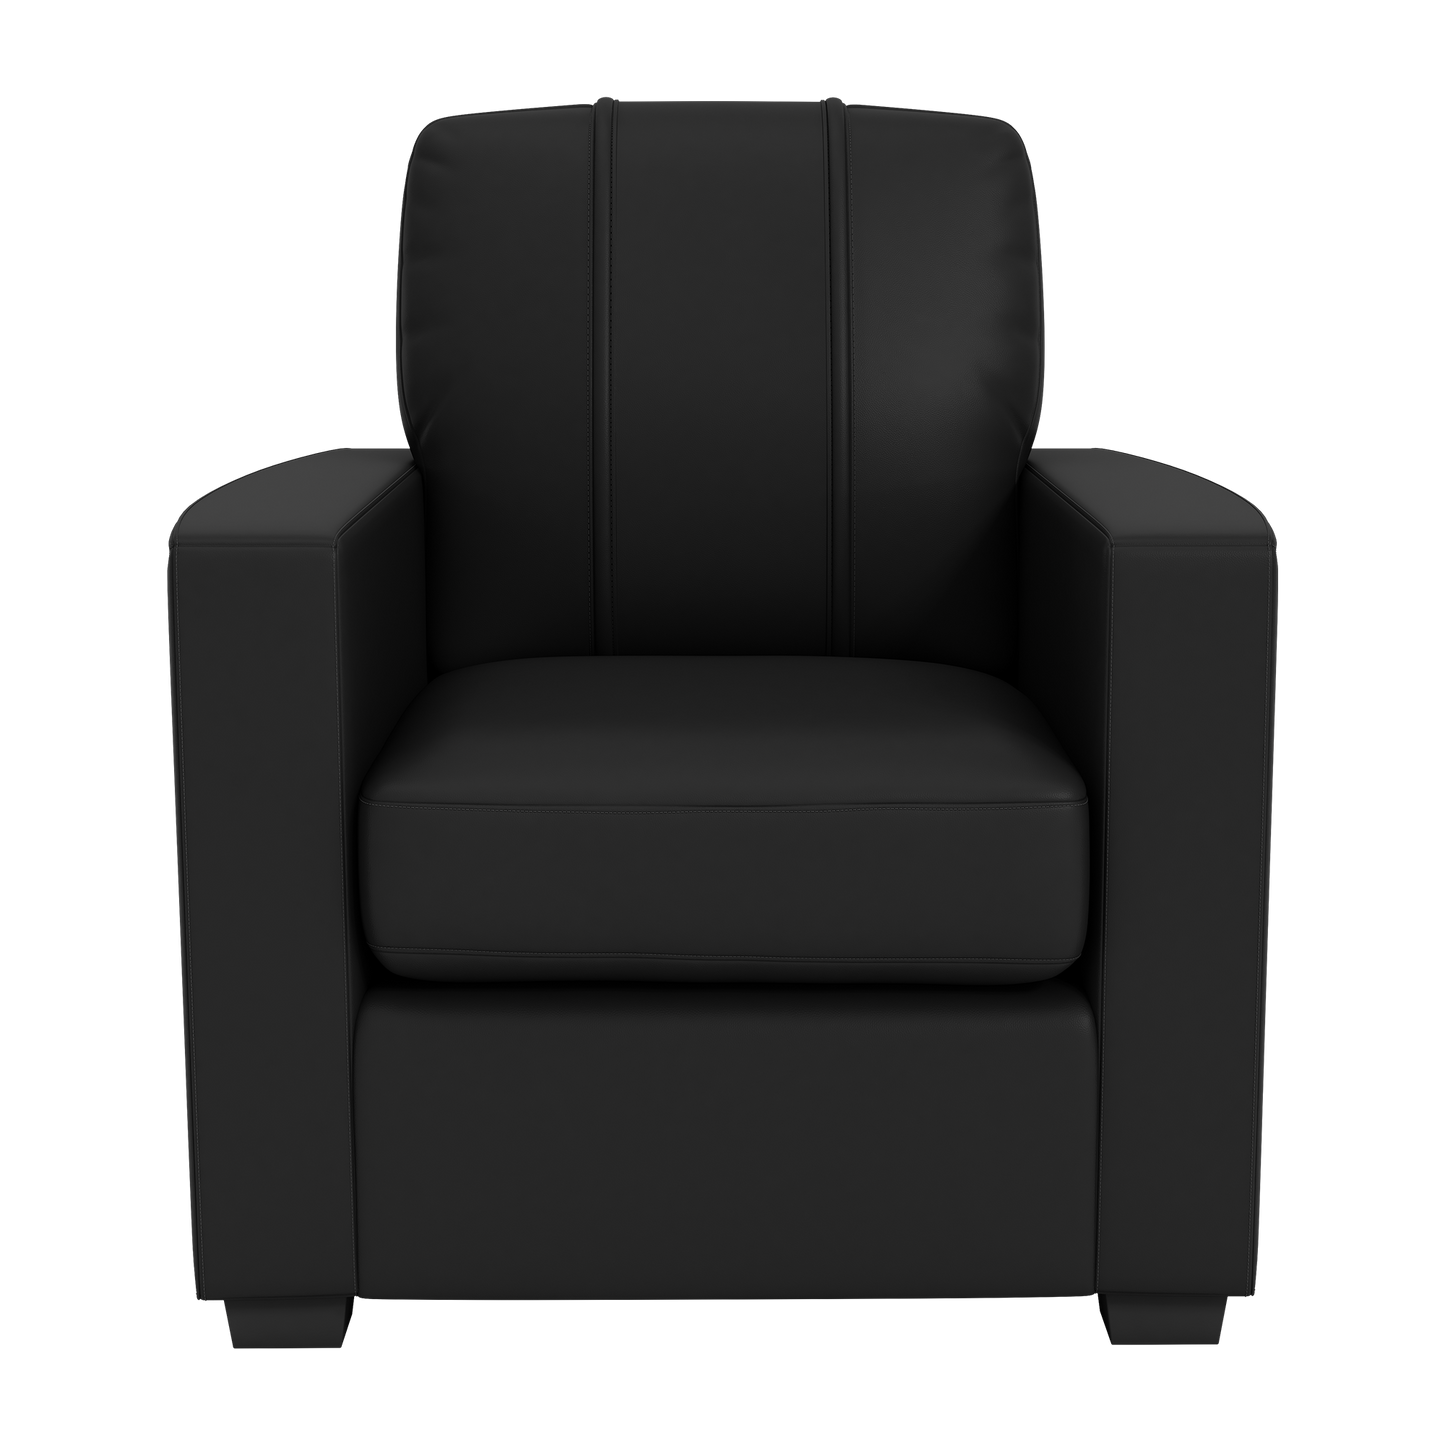 Silver Club Chair with  Indianapolis Colts Secondary Logo